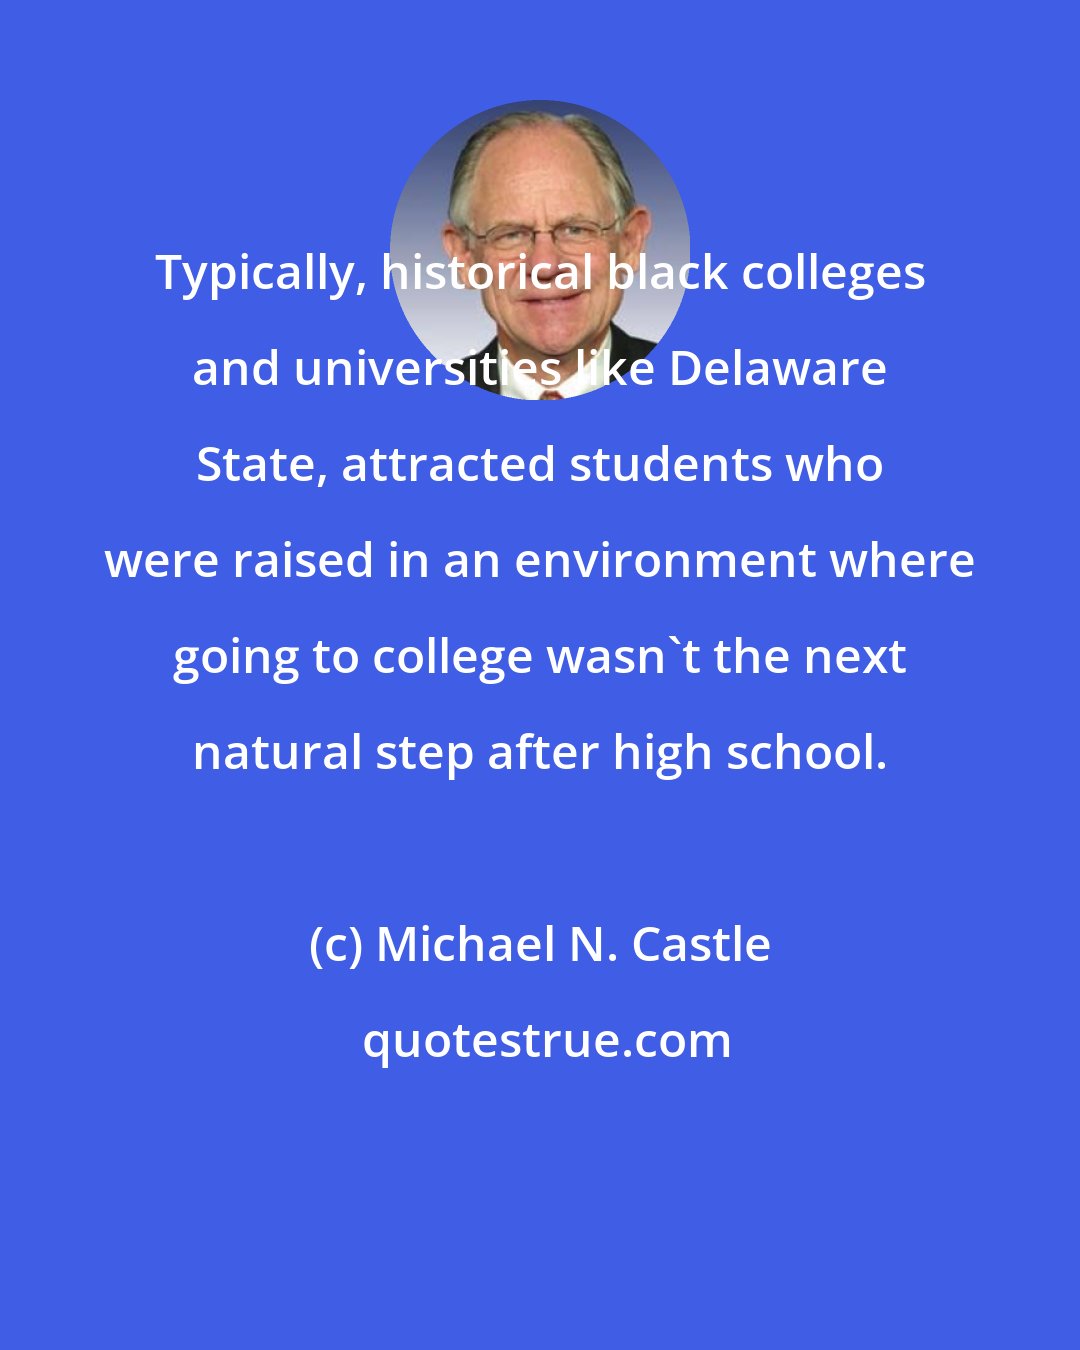 Michael N. Castle: Typically, historical black colleges and universities like Delaware State, attracted students who were raised in an environment where going to college wasn't the next natural step after high school.